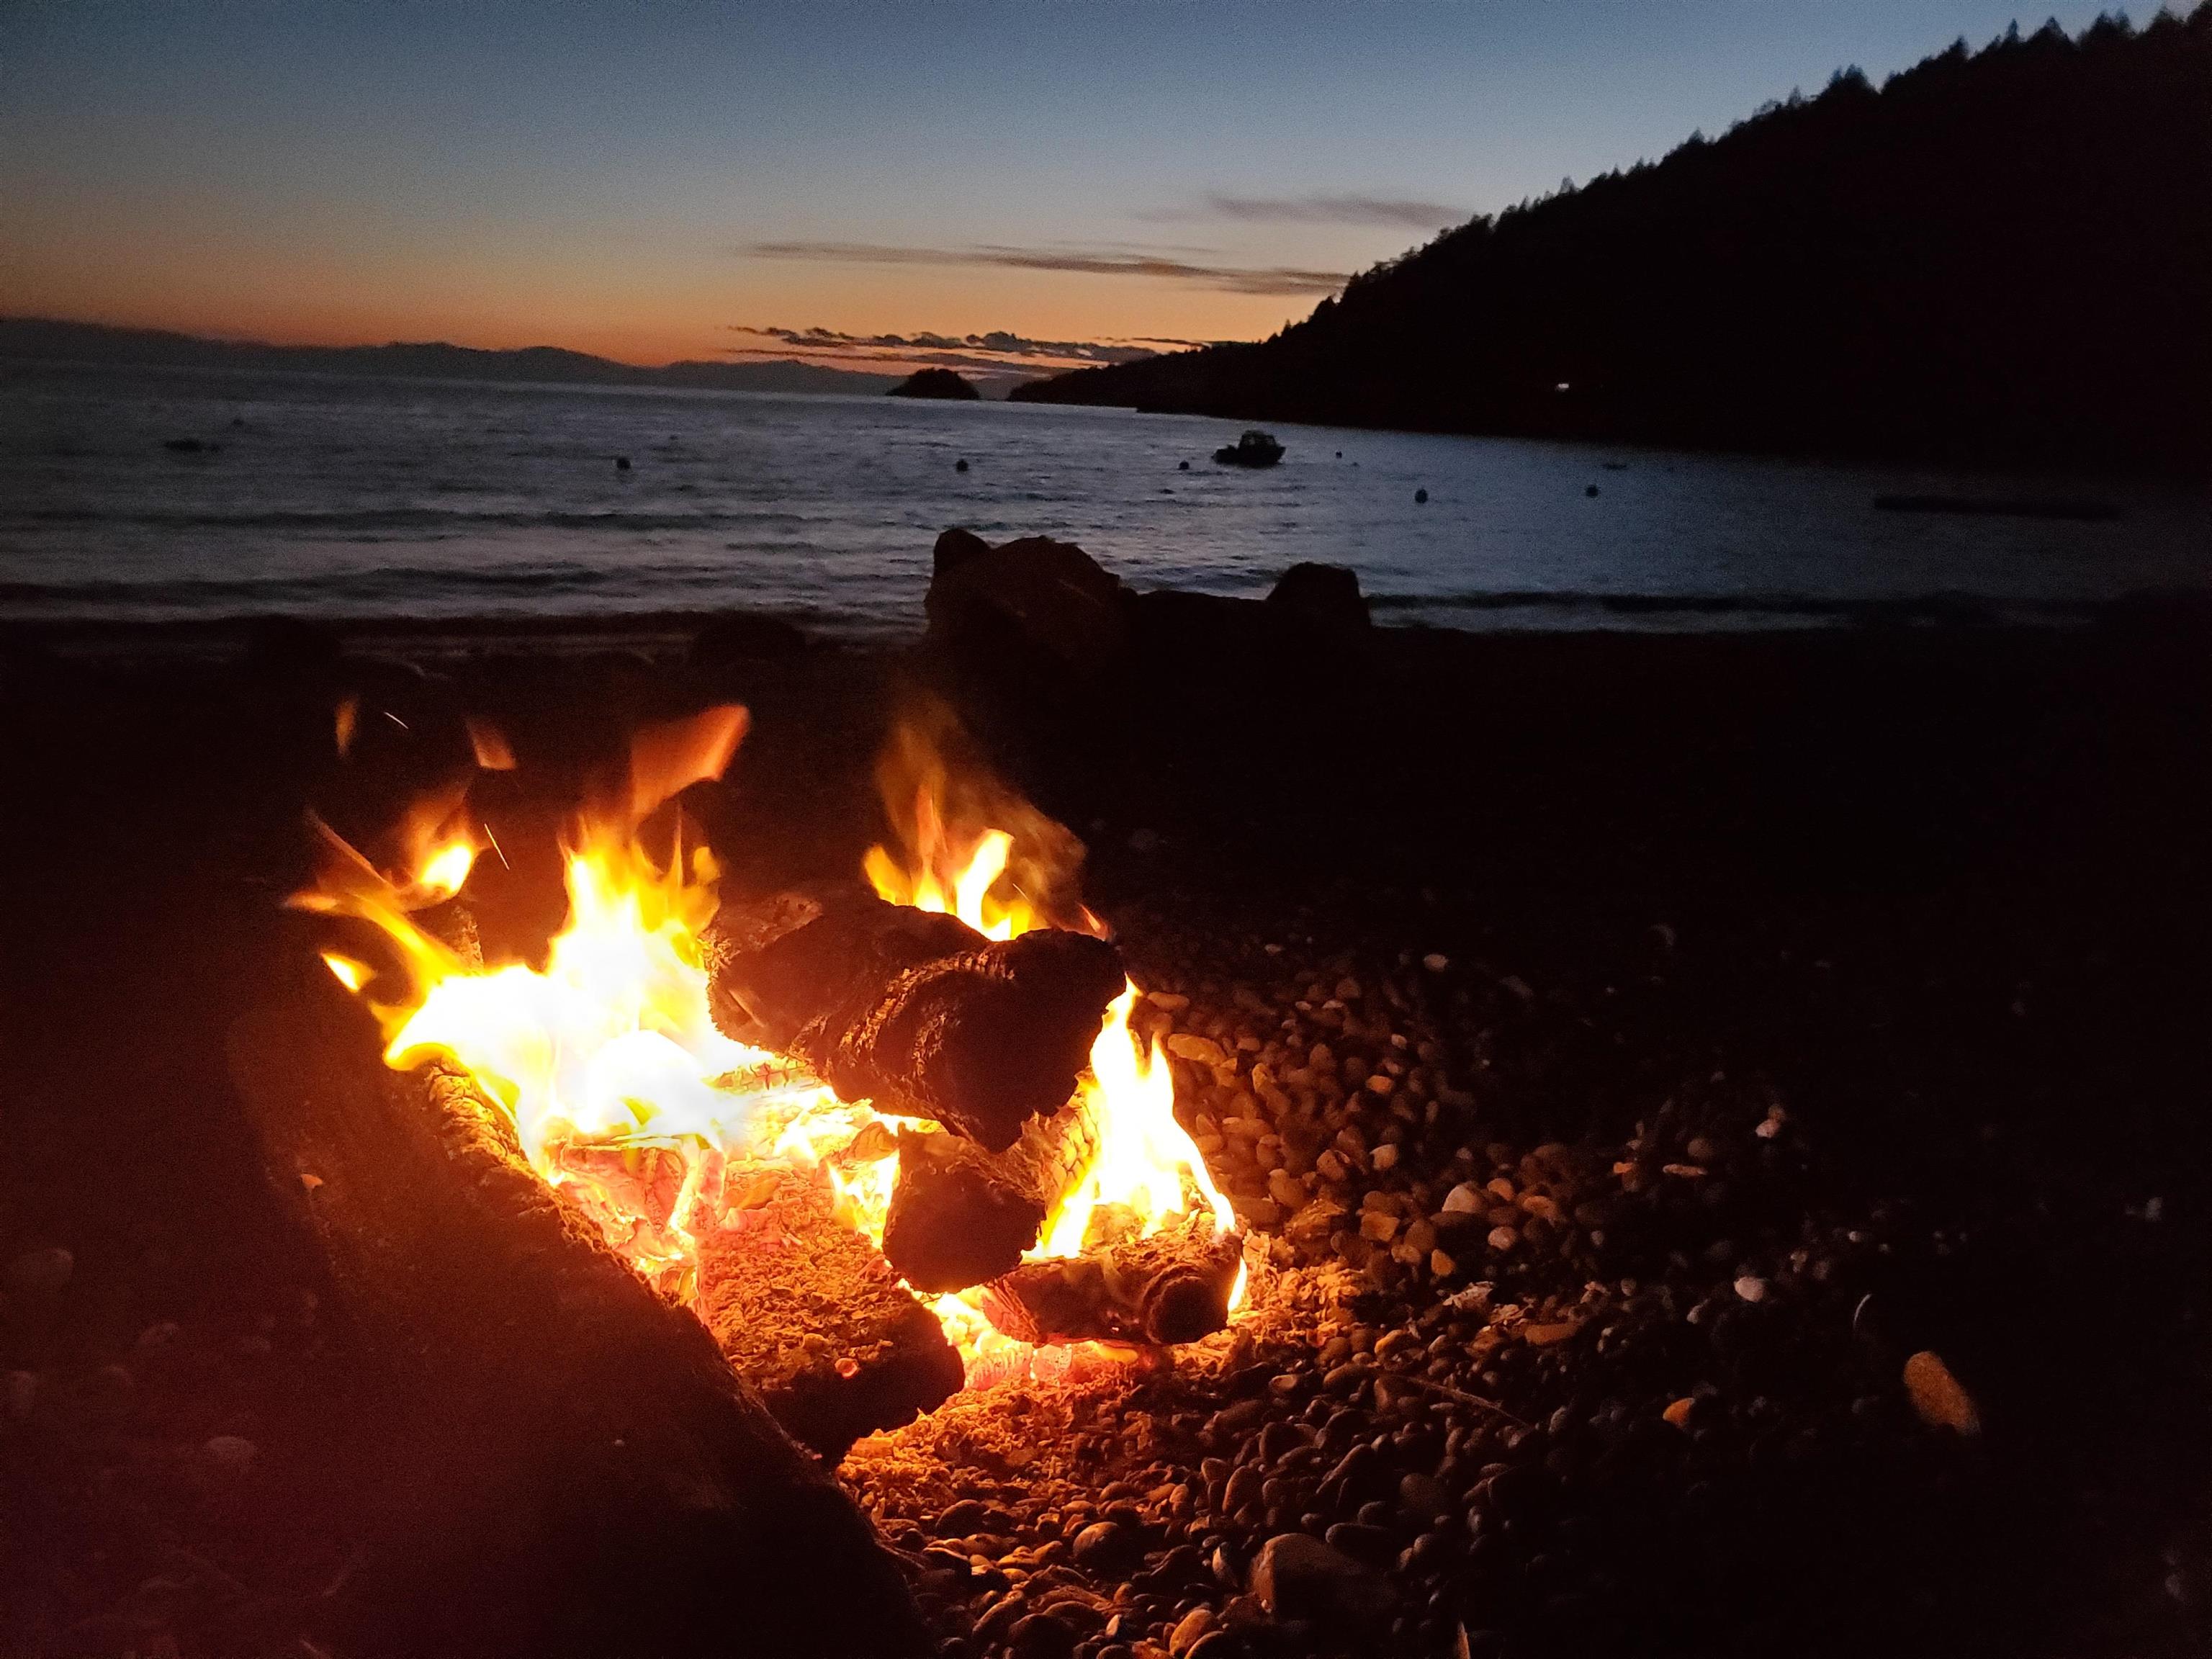 Walk over to beautiful West Beach to watch sunsets and enjoy a winter bonfire